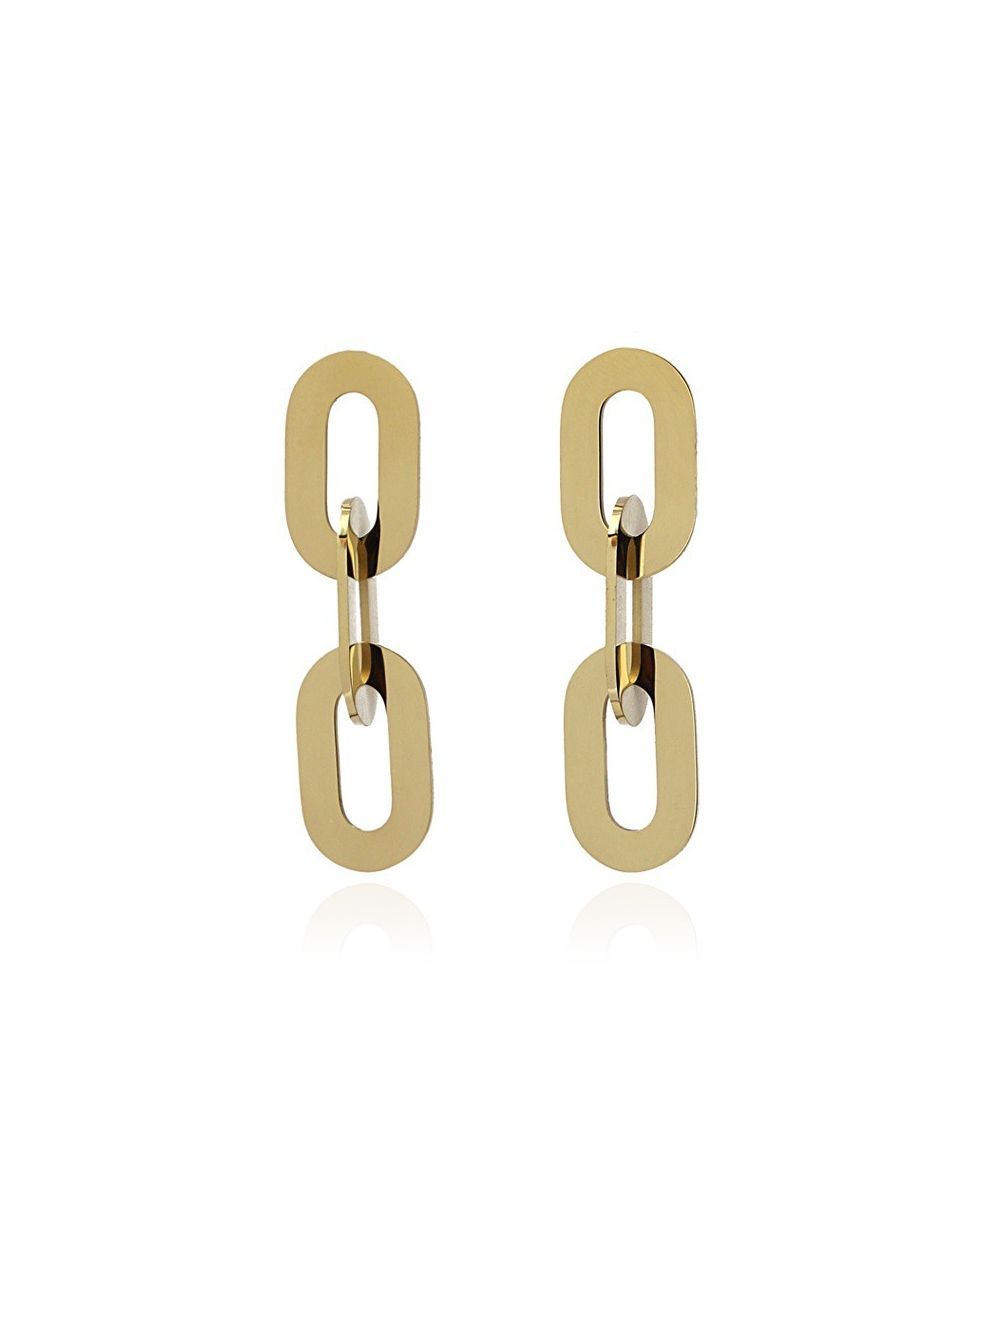 Three Links 14K Gold Plated Earrings with Post Back